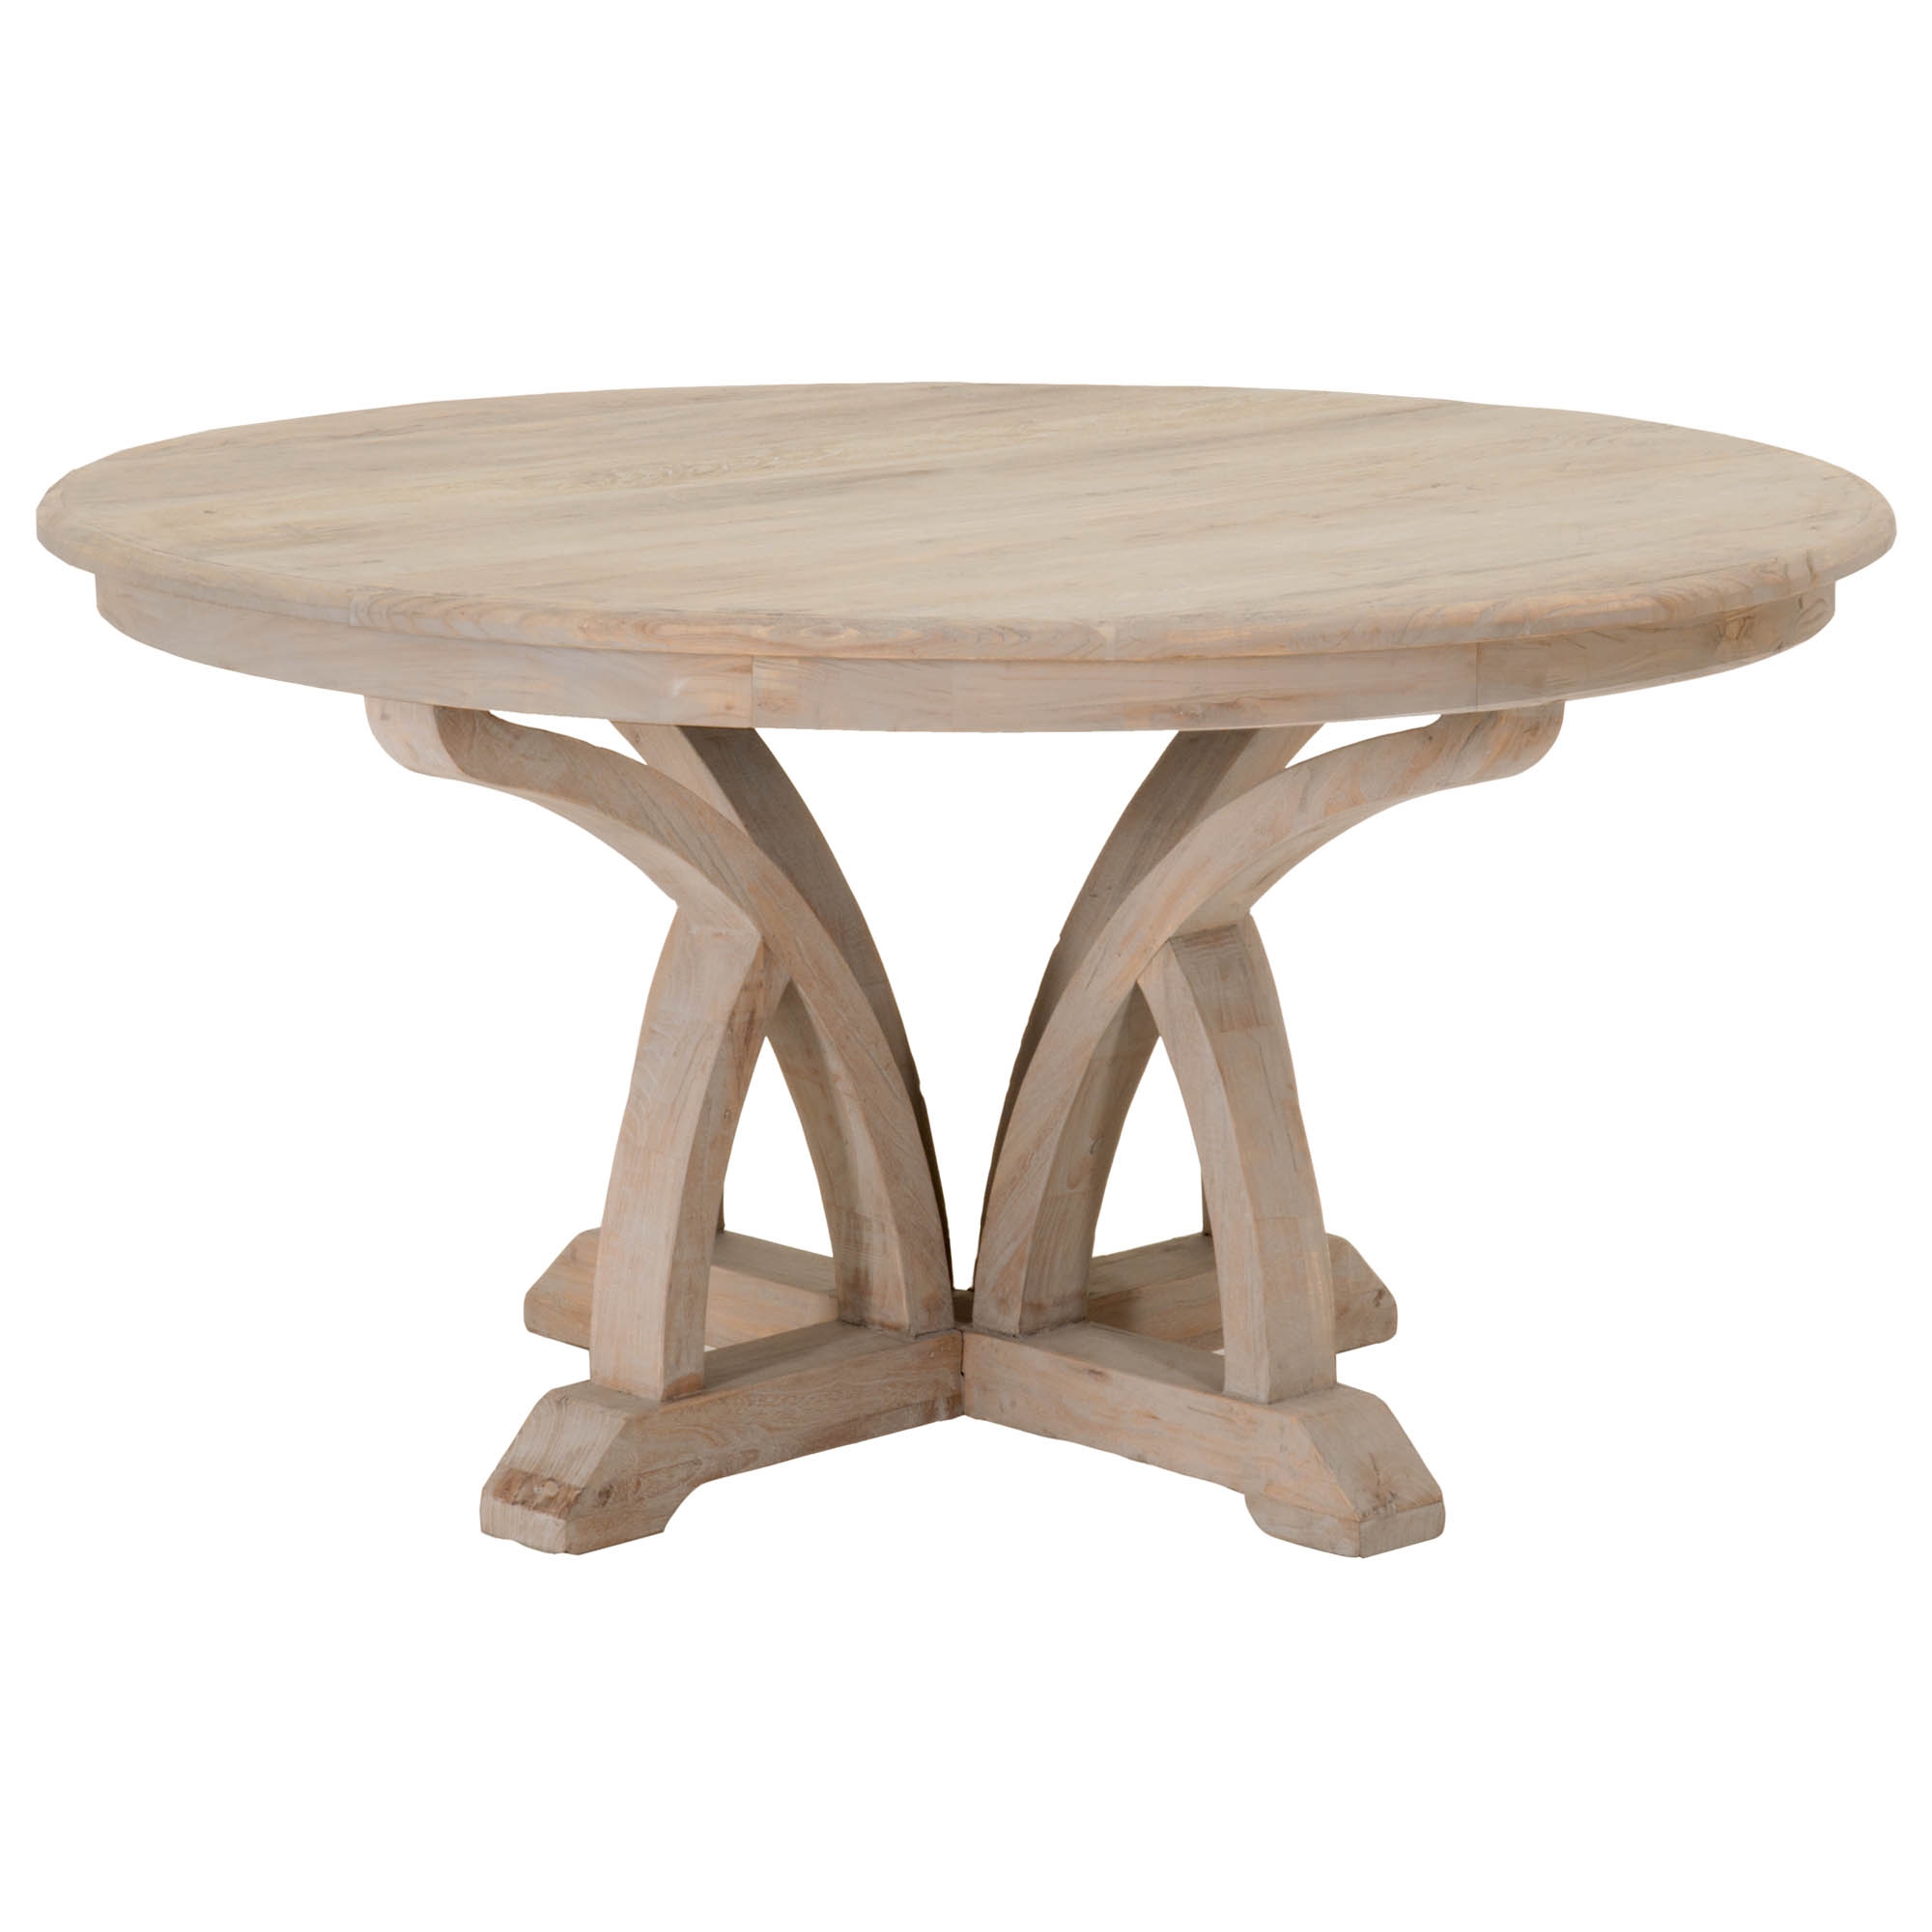 Marin Round Dining Table, 60", DISCONTINUED - Image 6